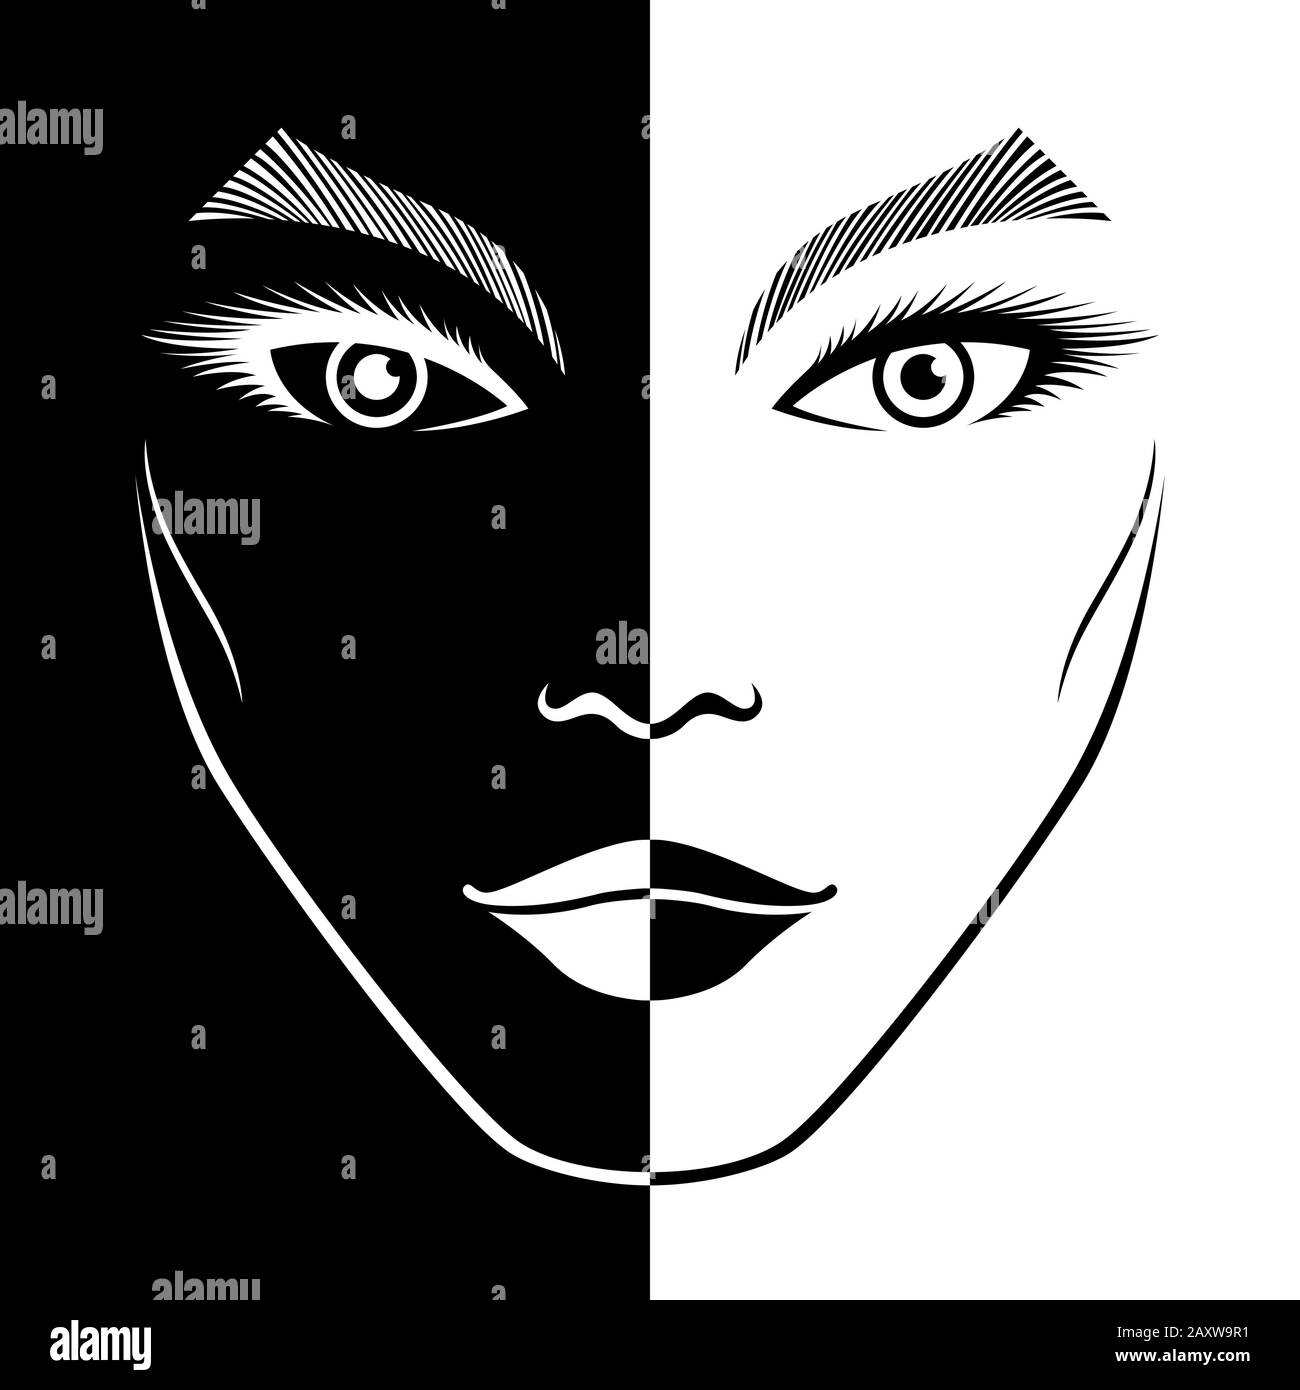 Positive negative space illustration Black and White Stock Photos & Images  - Alamy